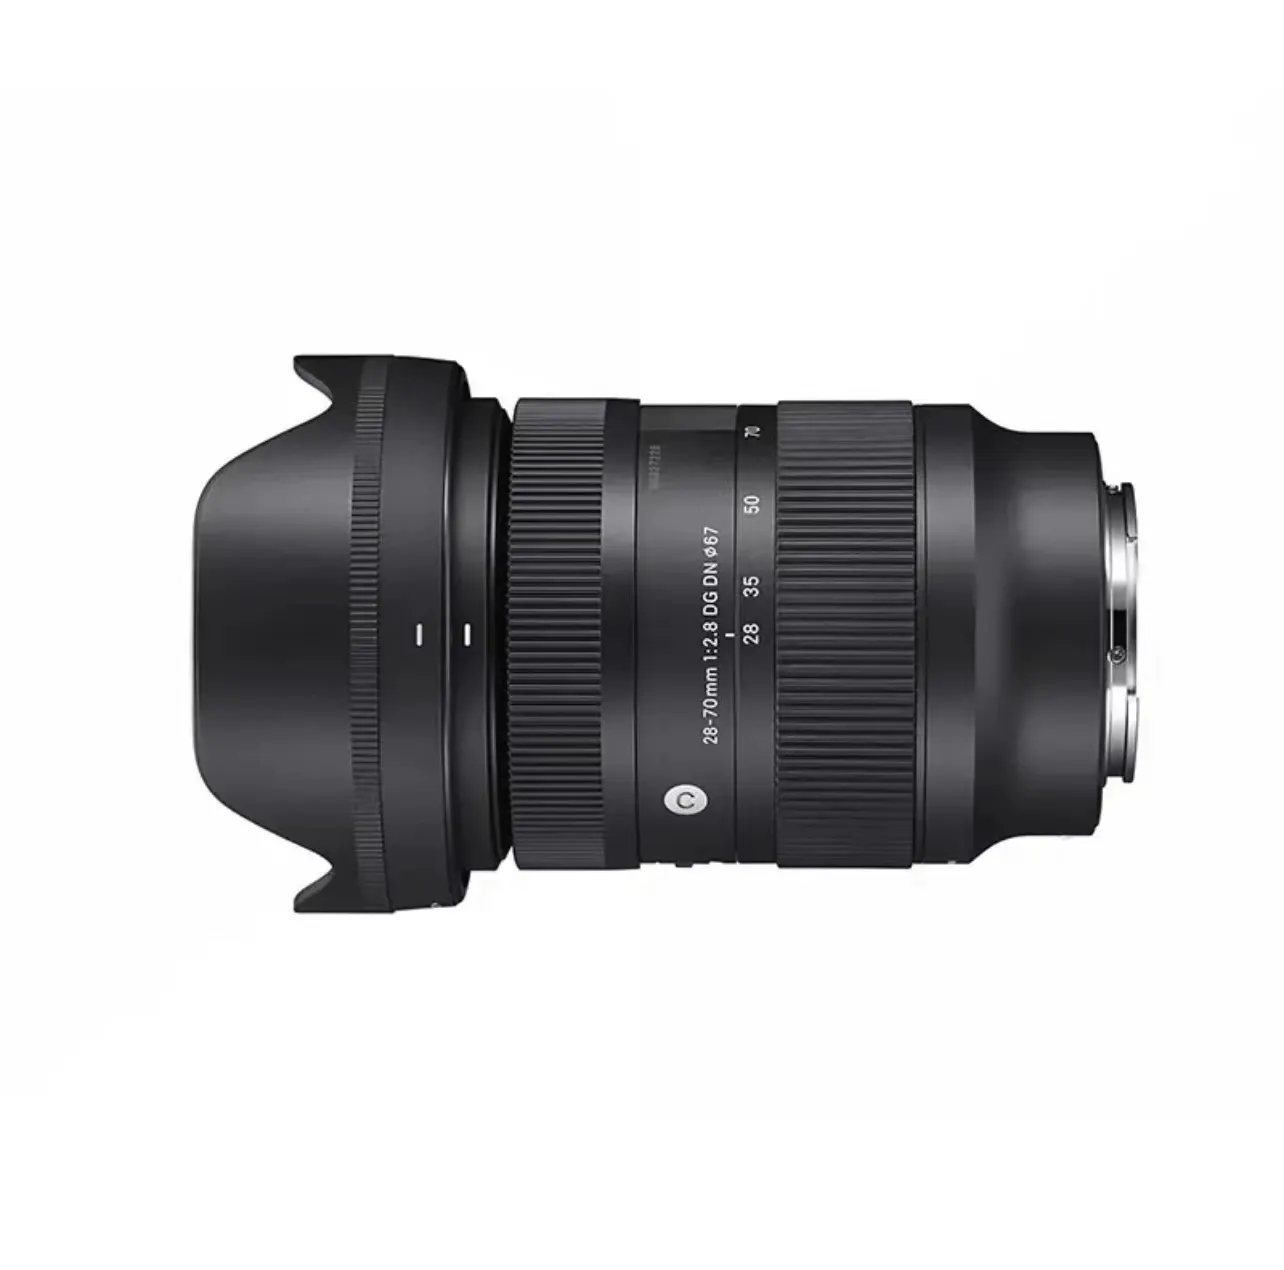 Professional Digital Used Camera Lenses For Sigma 28-70mm F 2.8 Dg Os Hsm Art, For Canon Nikon Sony Cameras Use Lenses